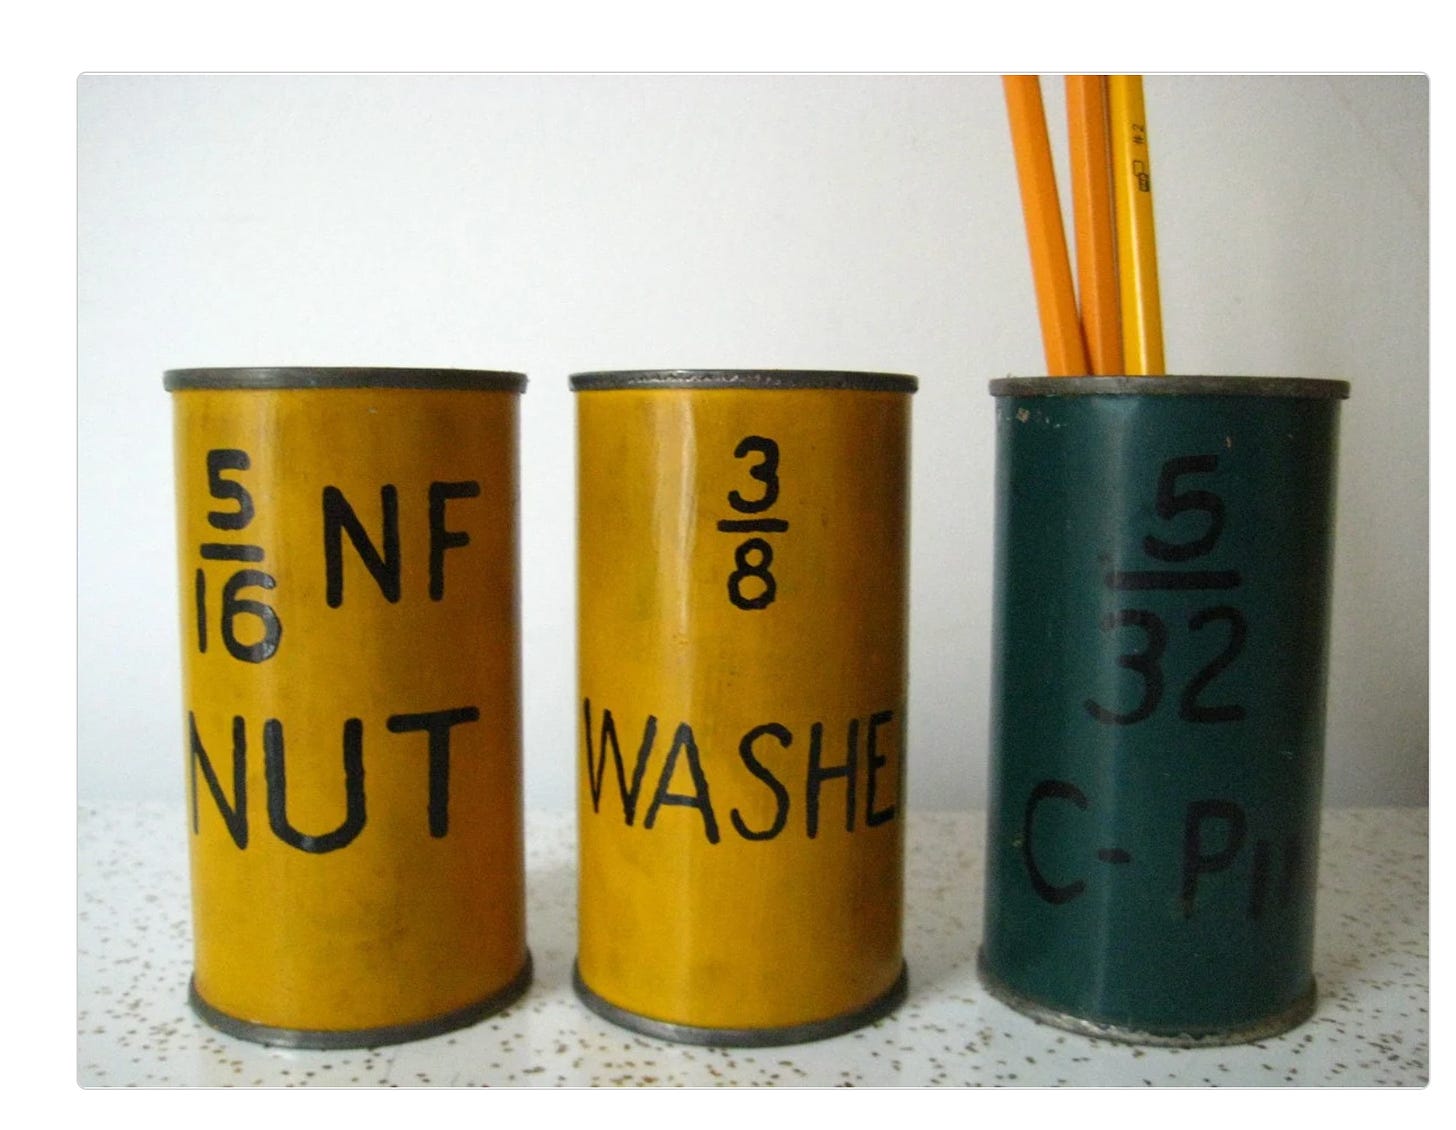 photo of two yellow and one teal juice can that are hand painted with the numbers 5/16 NF NUT, 3/8 WASHERS and 5/32 C-PIN, with yellow pencils coming out of the teal can. caption explains this is an etsy listing photo